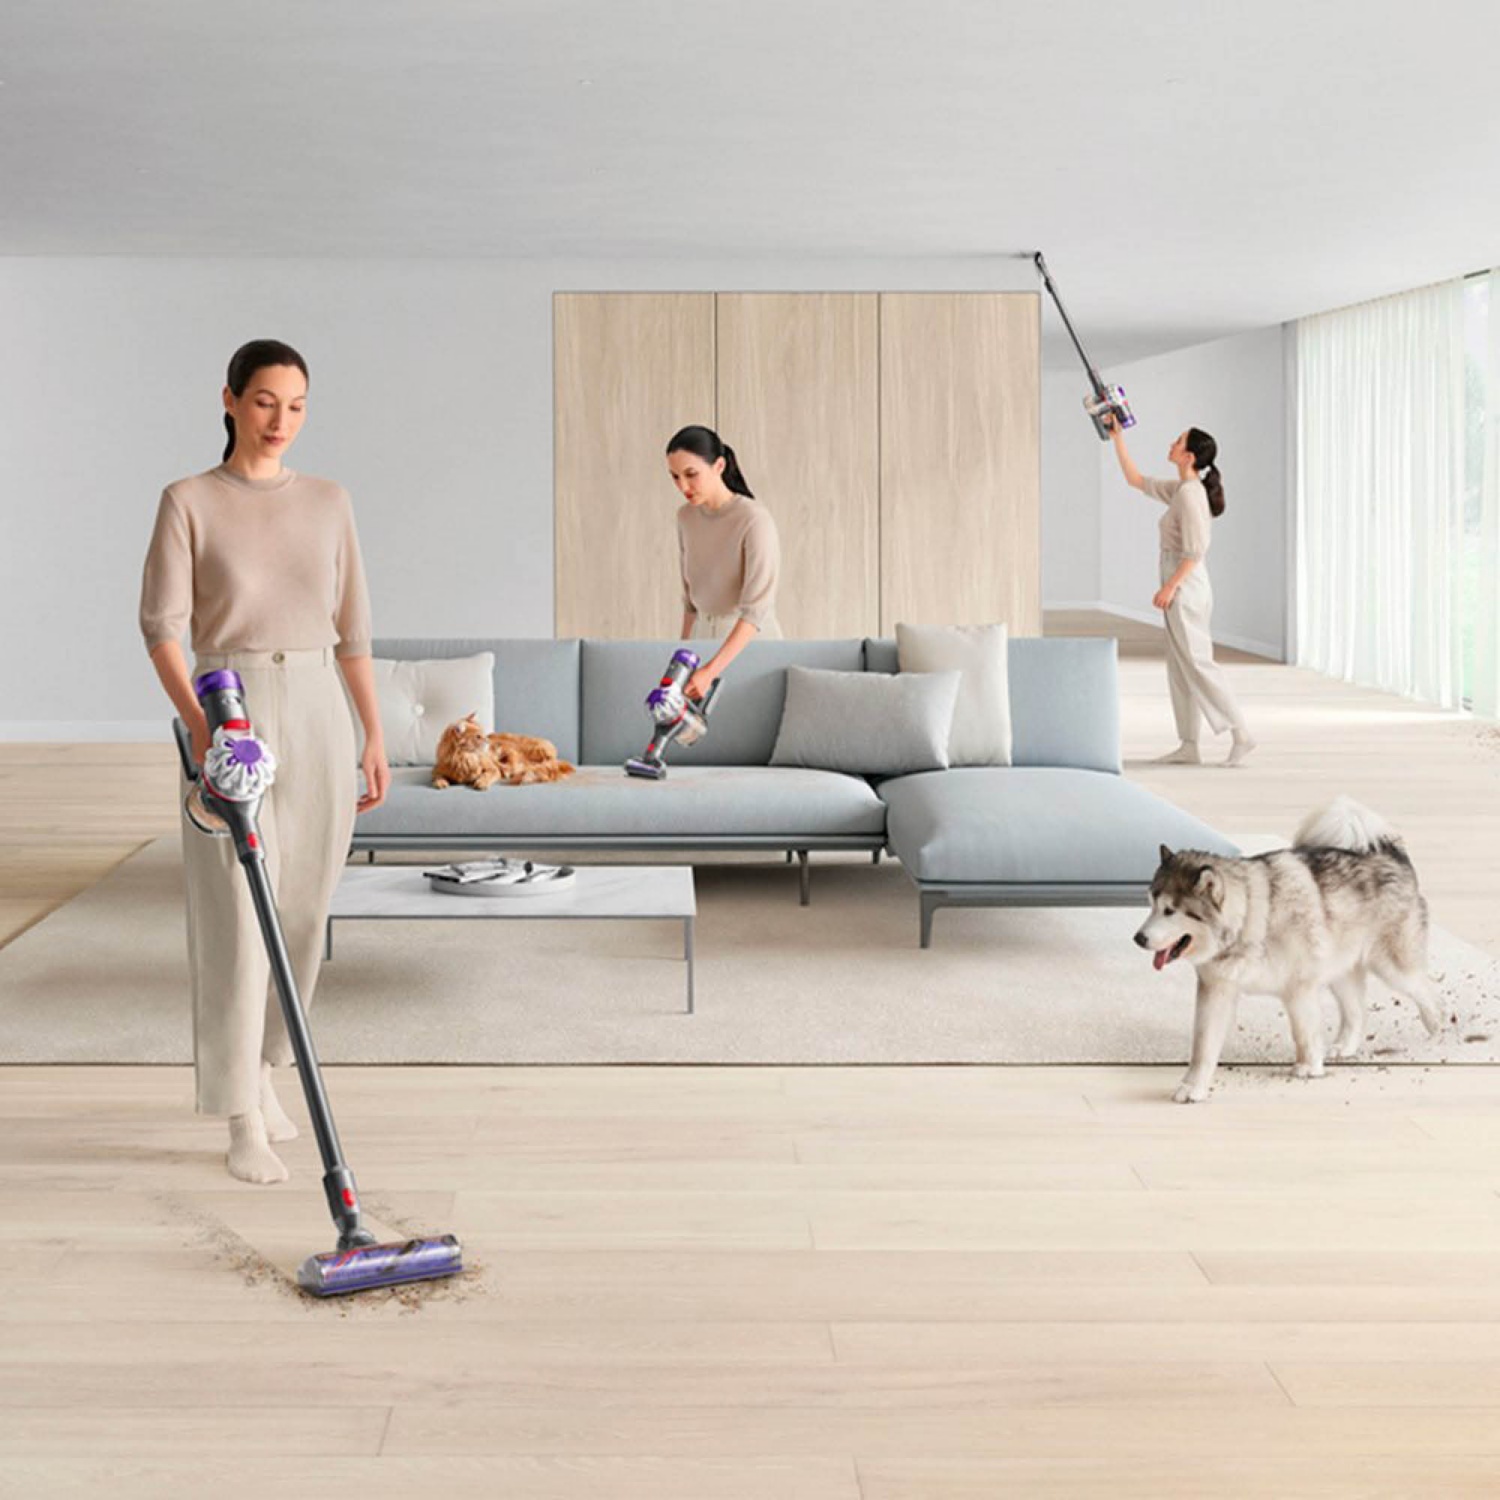 DYSON V8 Absolute Staubsauger